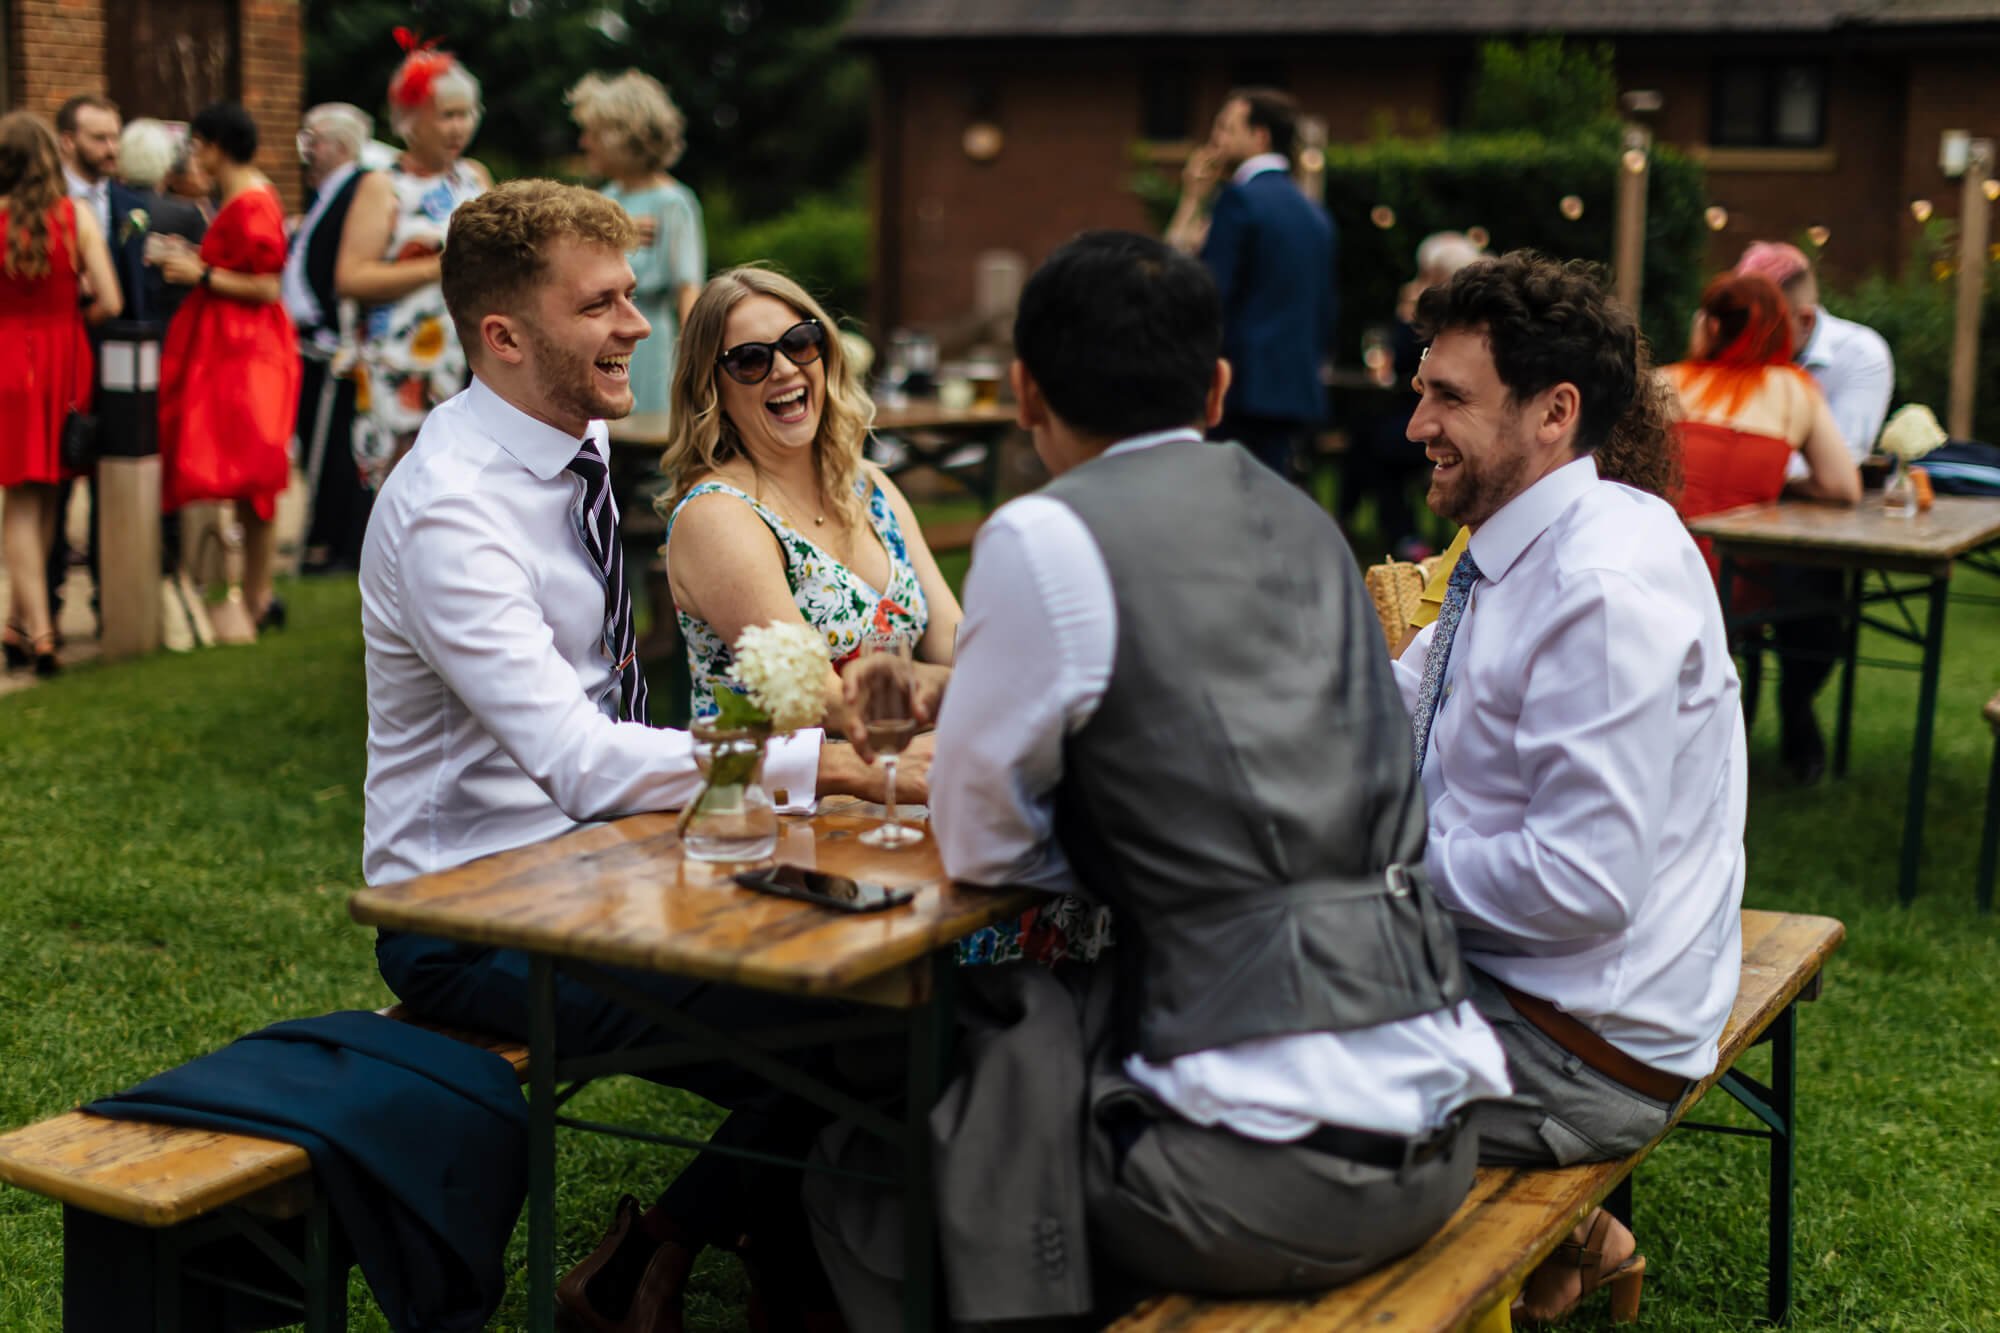 Wedding guests laughing in the Leeds sunshine